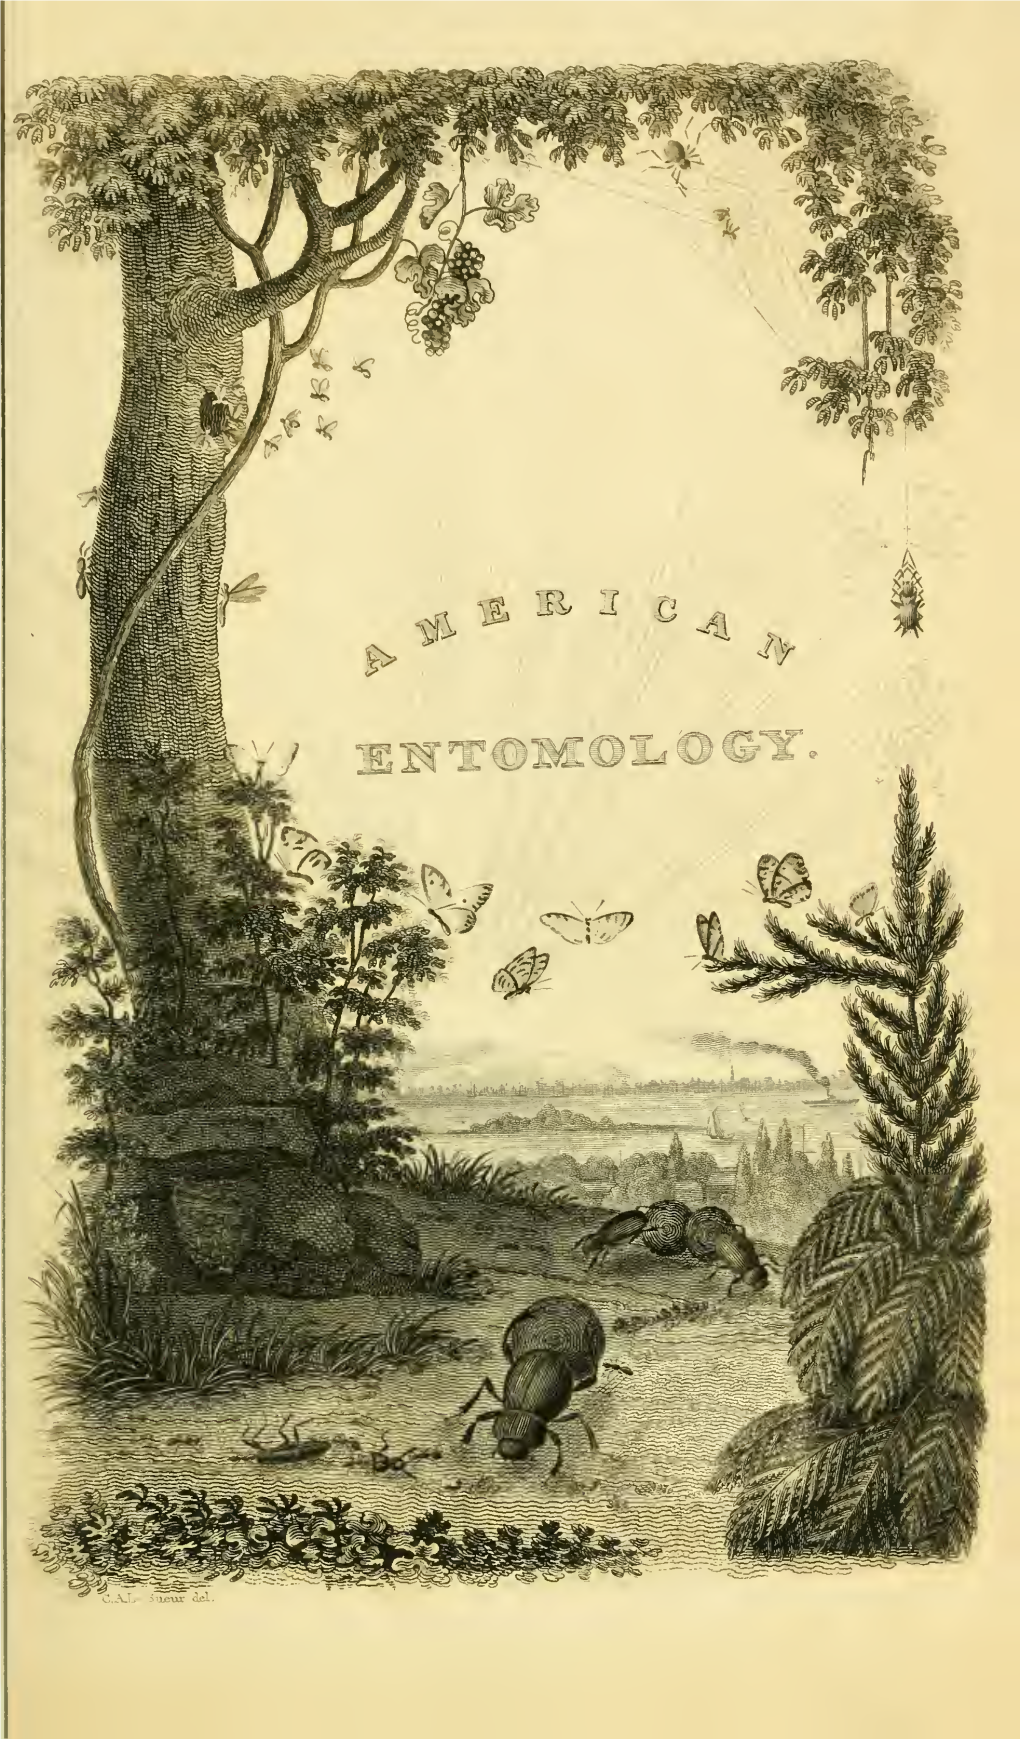 American Entomology, Or Descriptions of the Insects of North